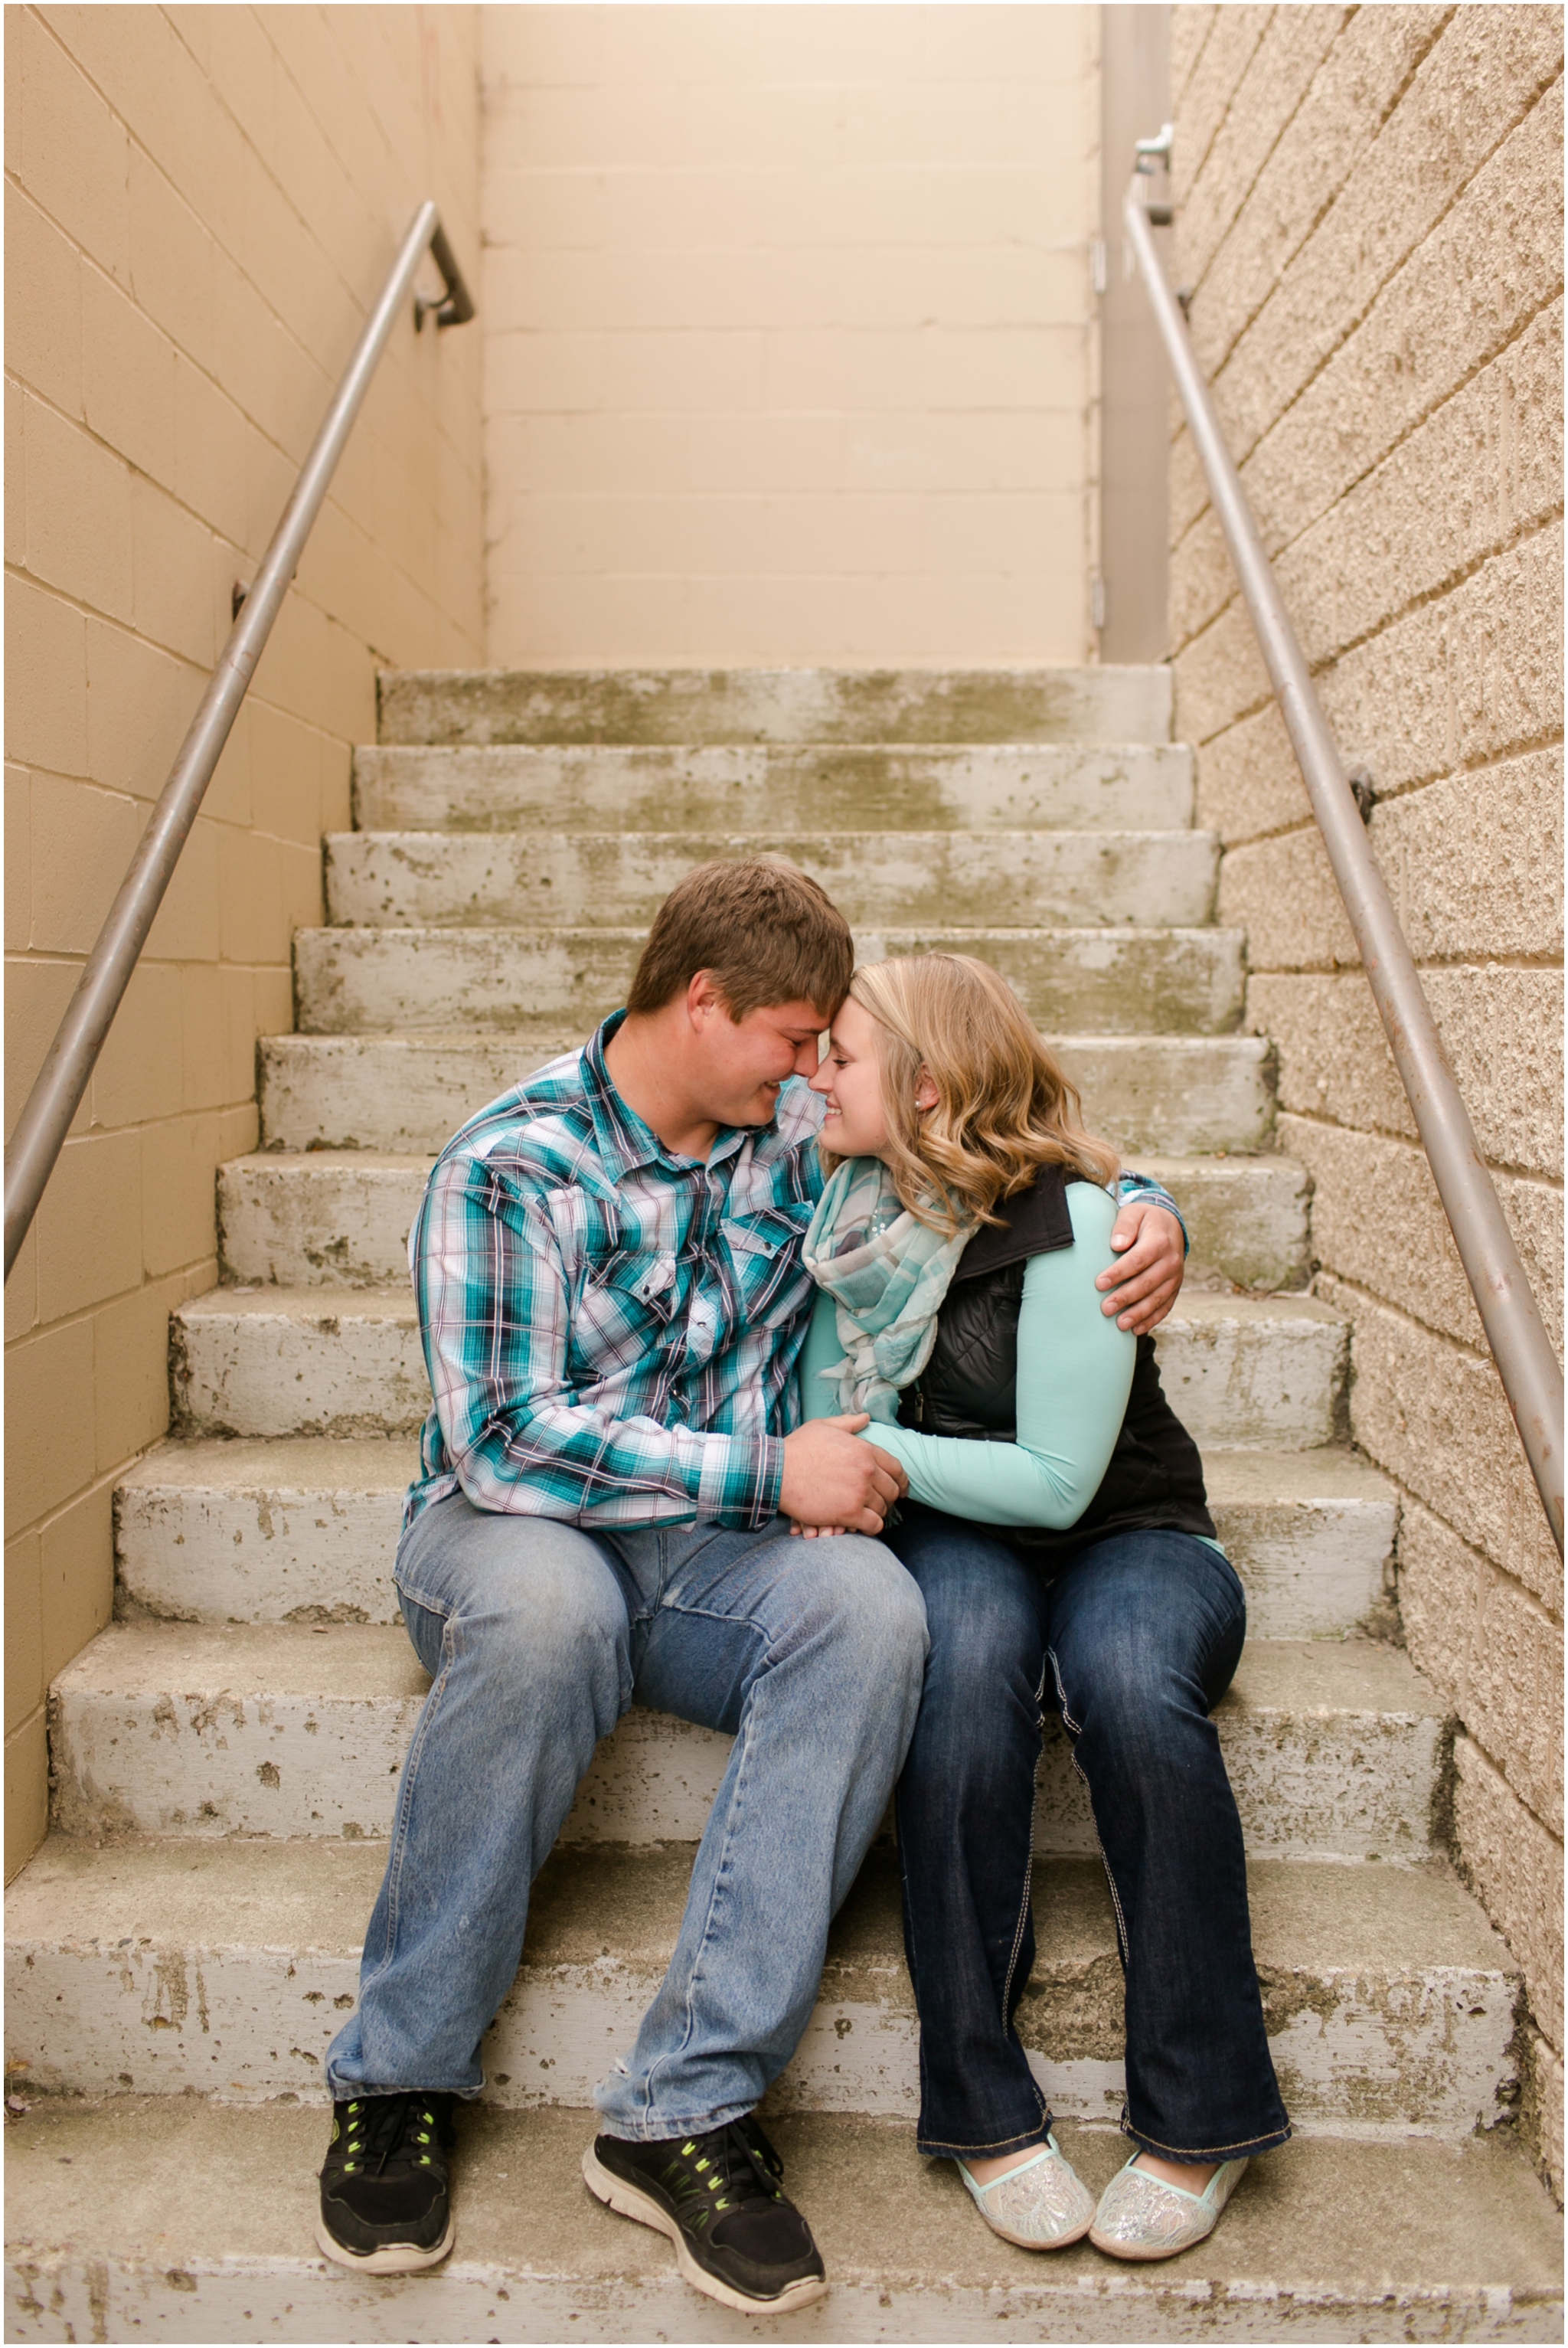 Detroit Lakes Engagement Session, Fall Engagement, Outdoor Couple